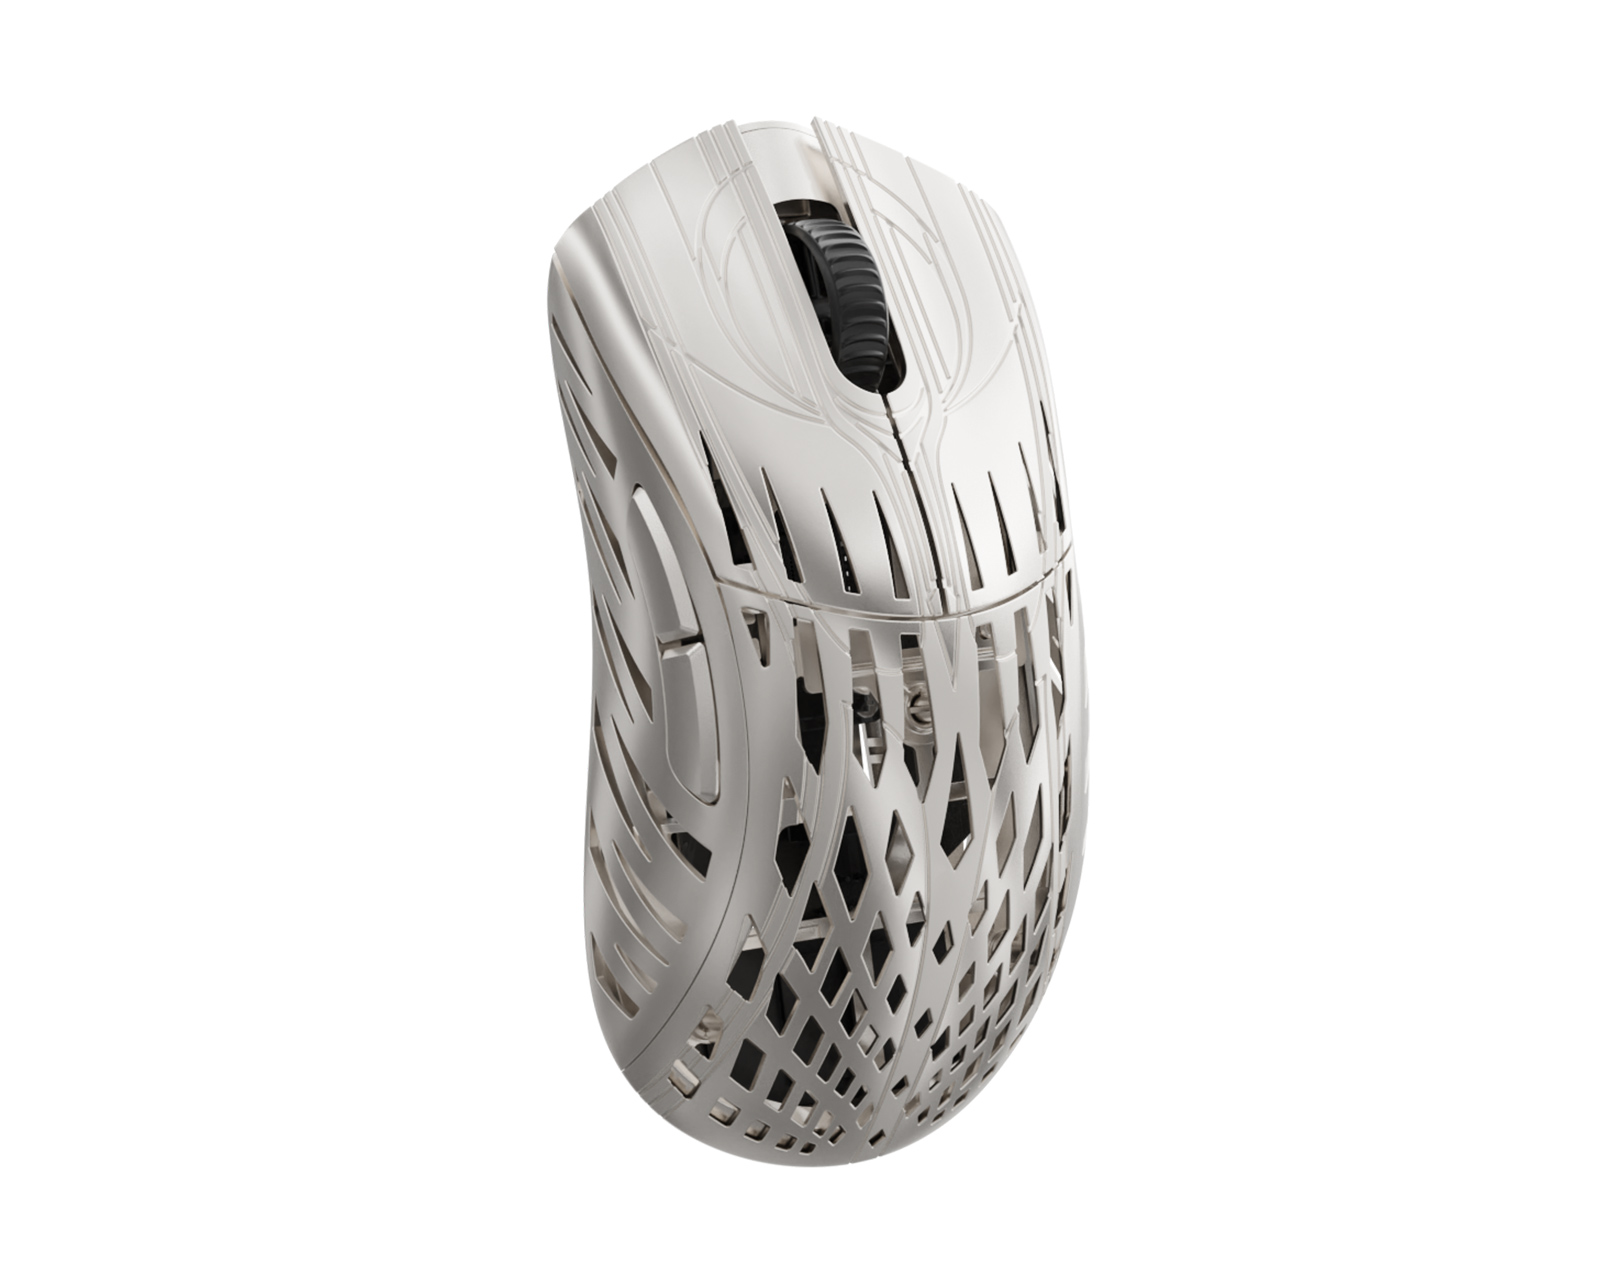 Pwnage Stormbreaker Magnesium Wireless Gaming Mouse - White (DEMO)